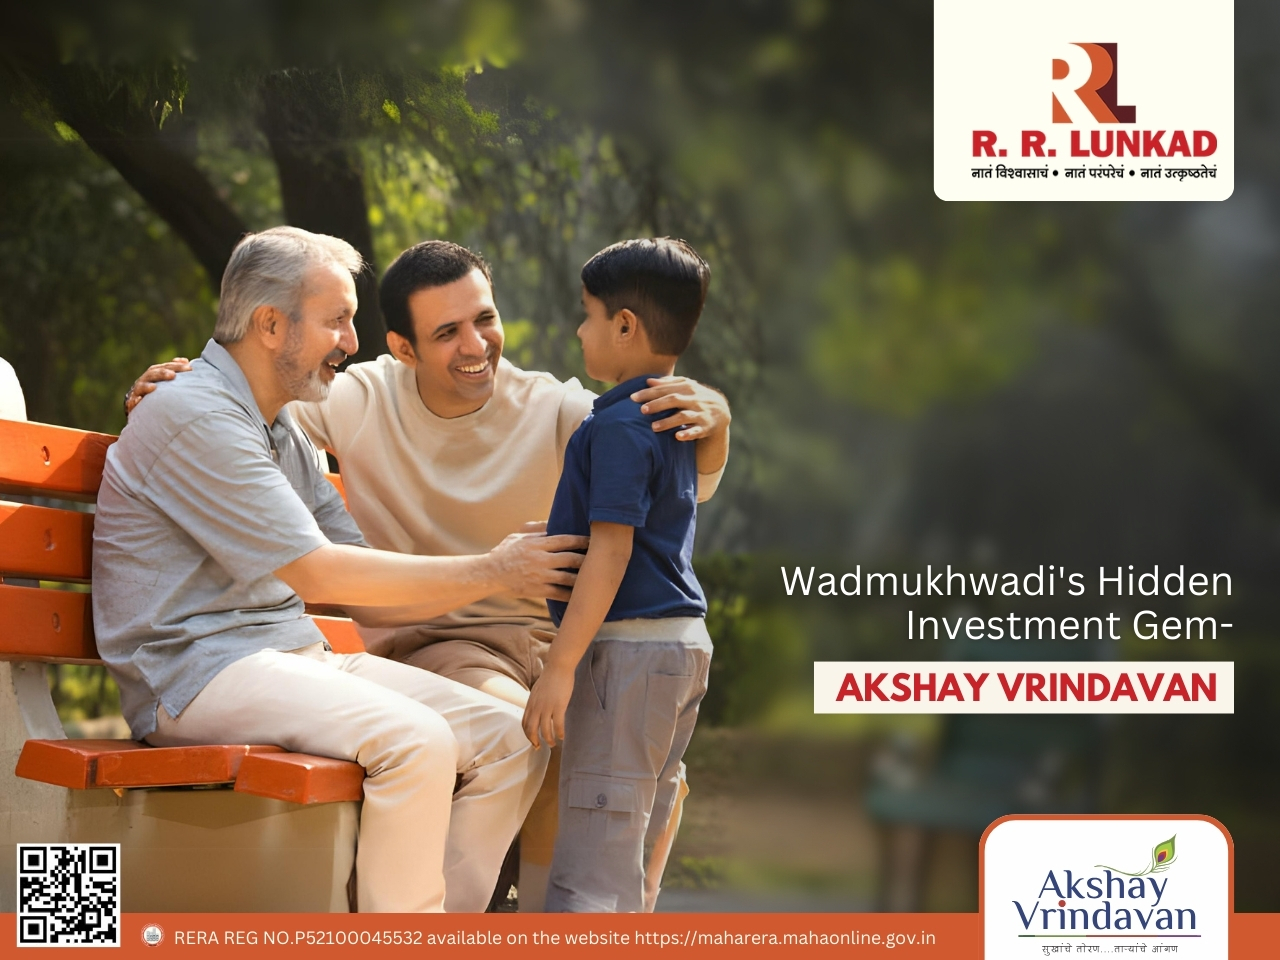 Discover the untapped potential and investment opportunities at Akshay Vrindavan in our latest blog